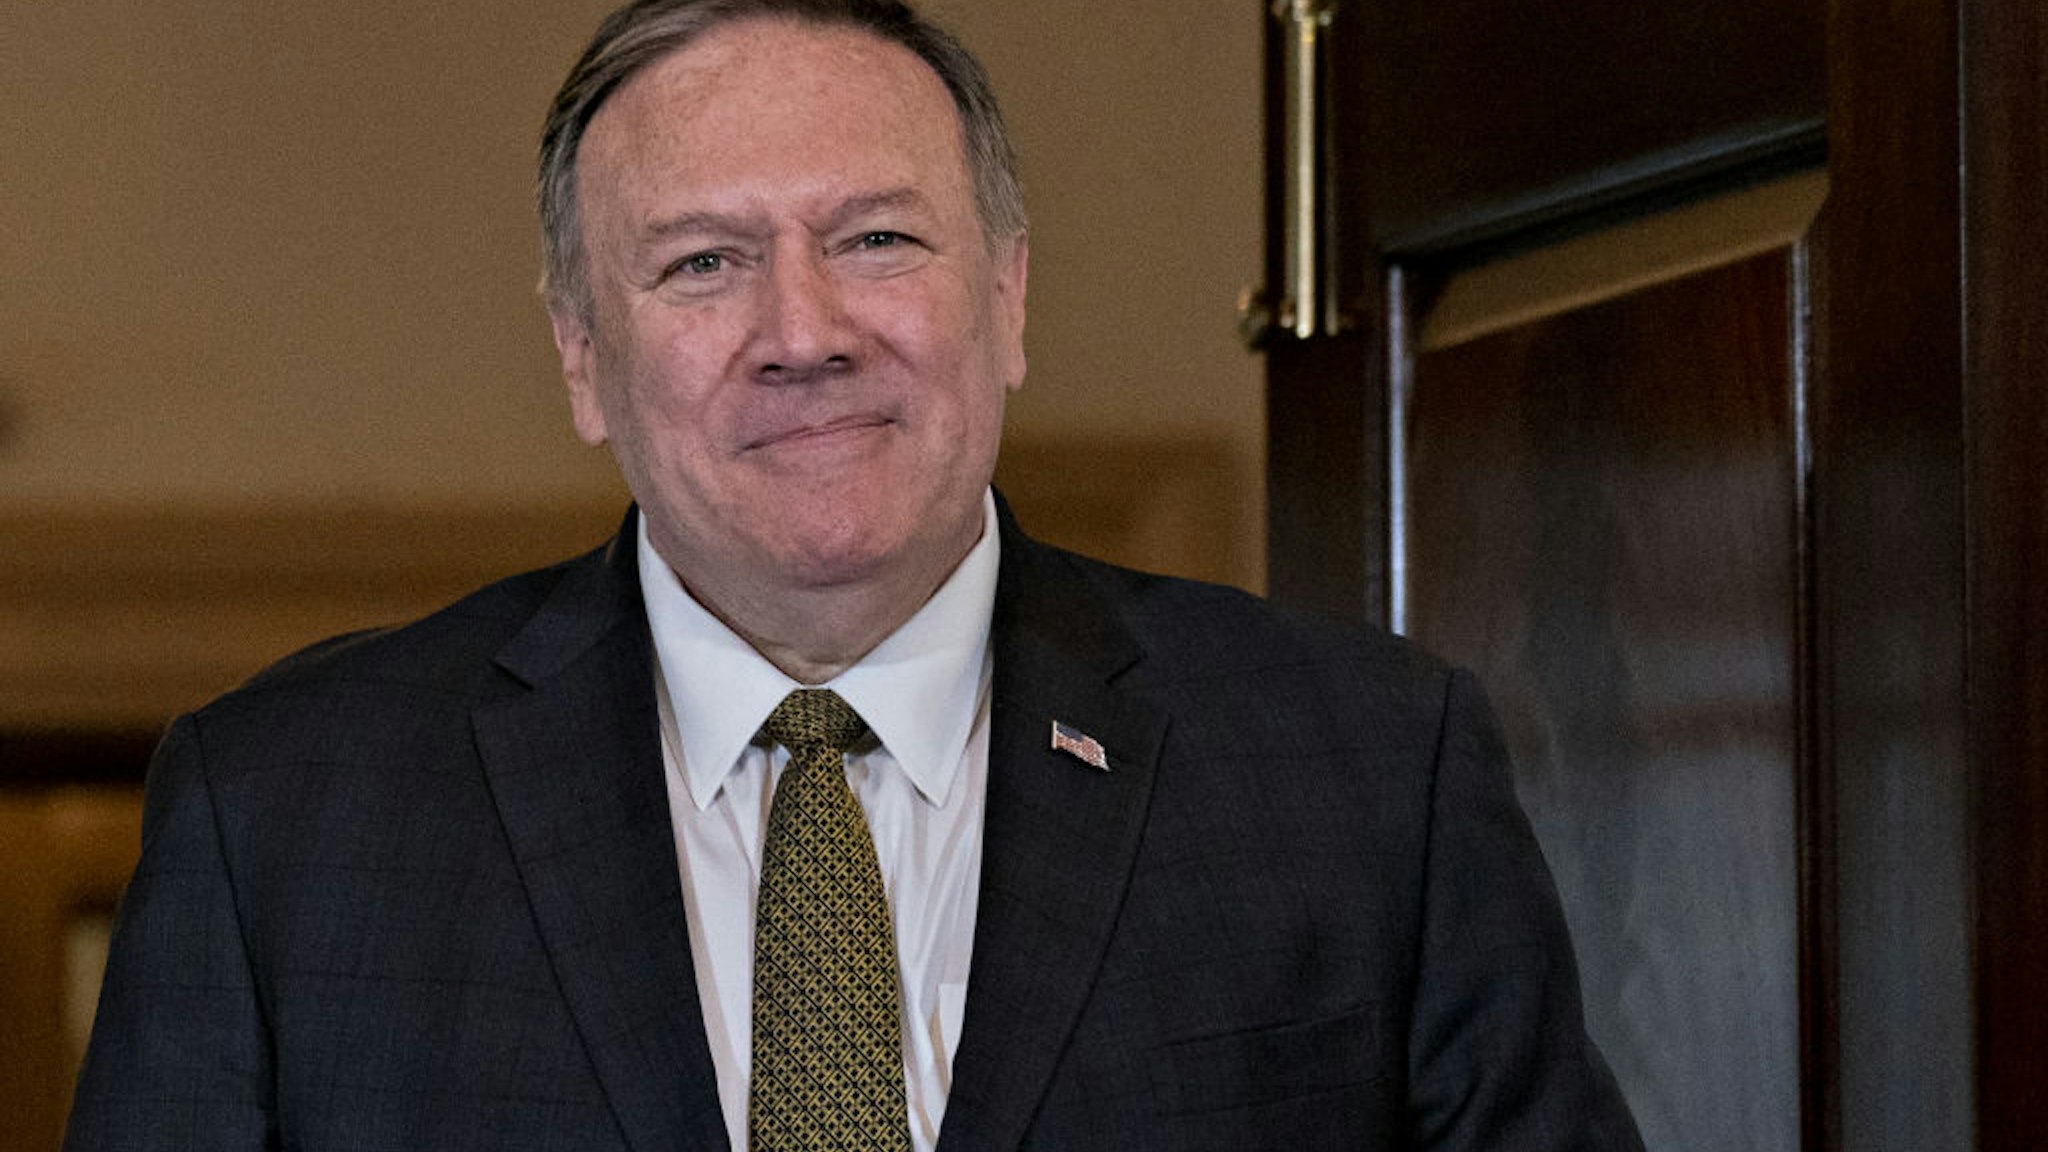 Mike Pompeo, U.S. secretary of state, arrives for a photo opportunity with Urmas Reinsalu, Estonia's foreign minister, not pictured, at the State Department in Washington, D.C., U.S., on Tuesday, Oct. 8, 2019.